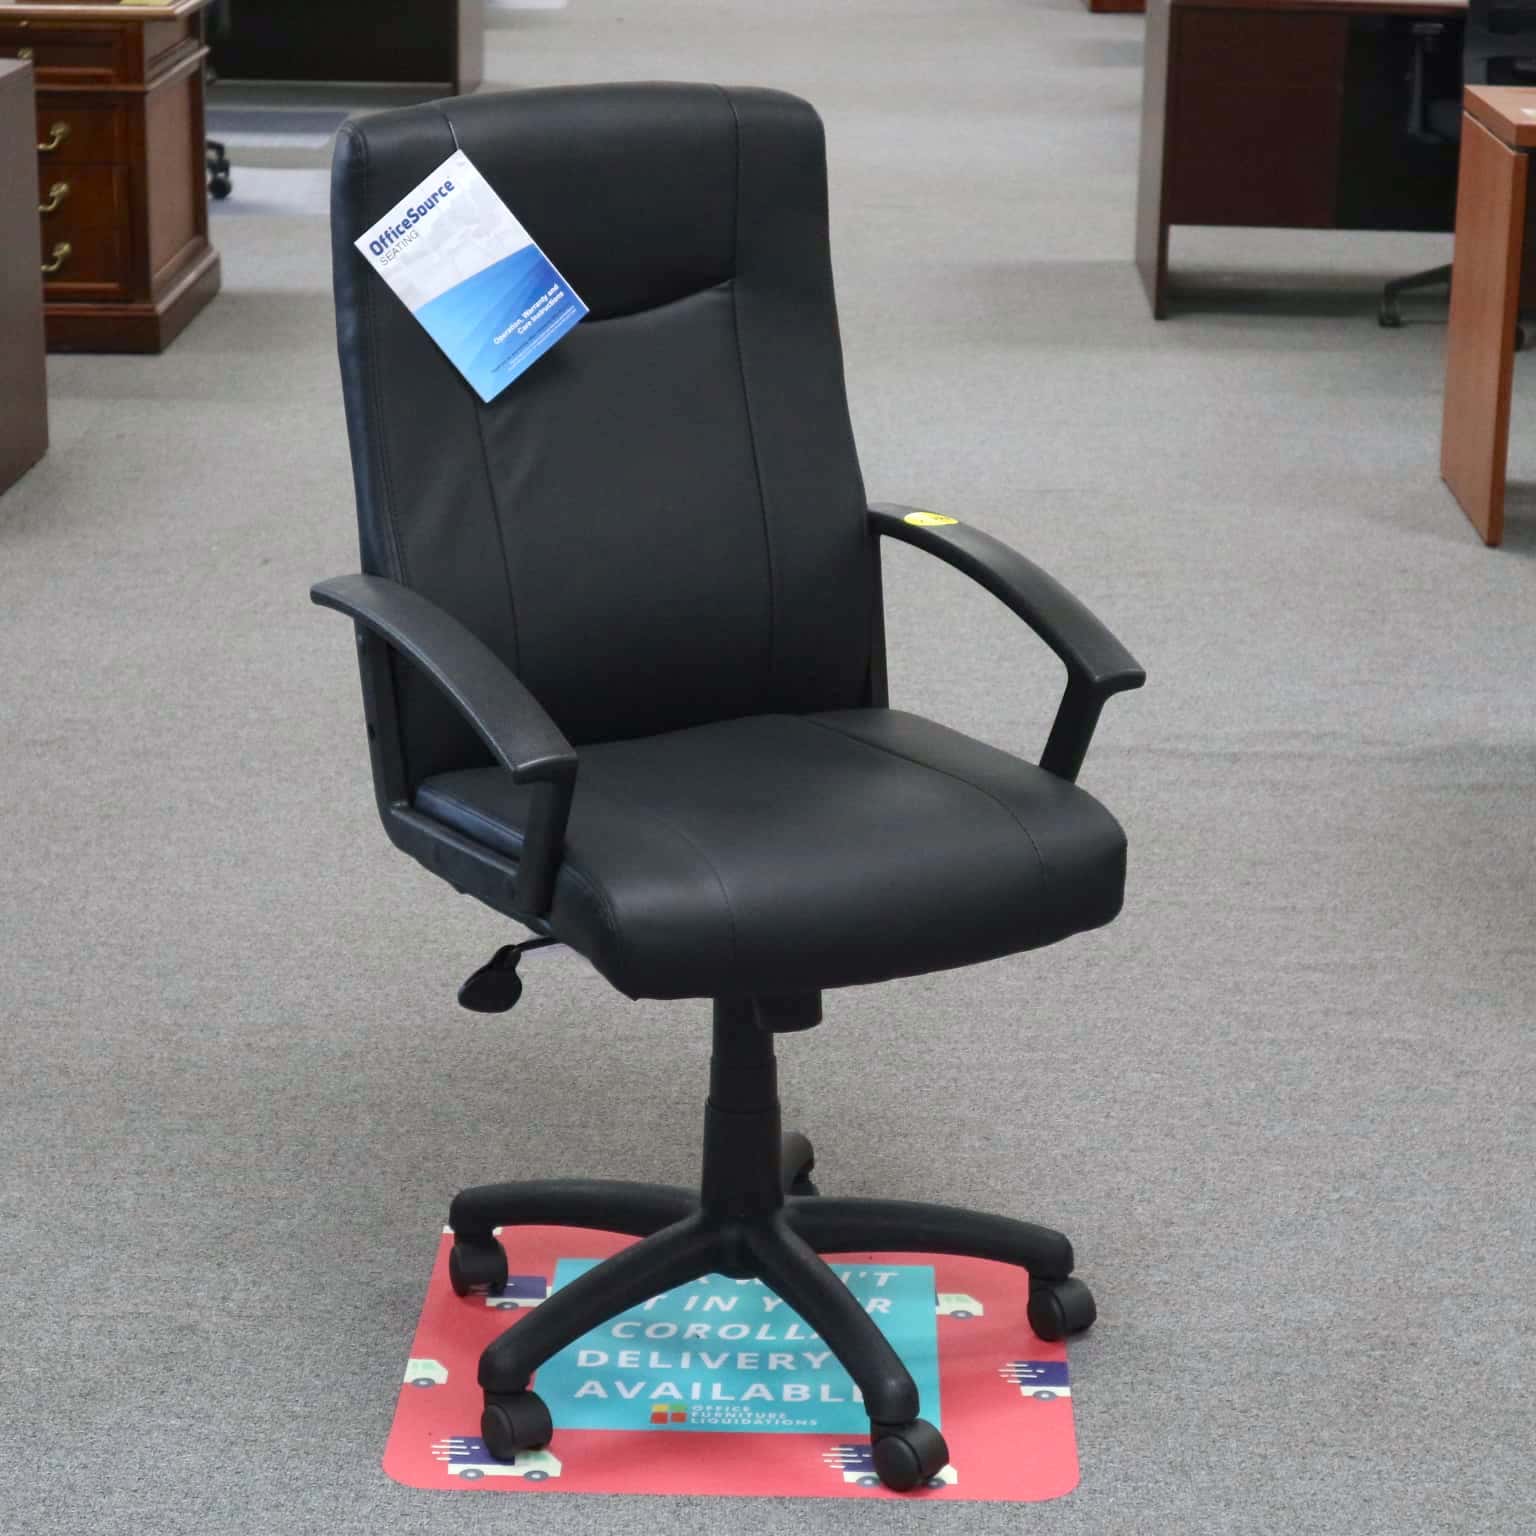 Black Conference Chair, front view